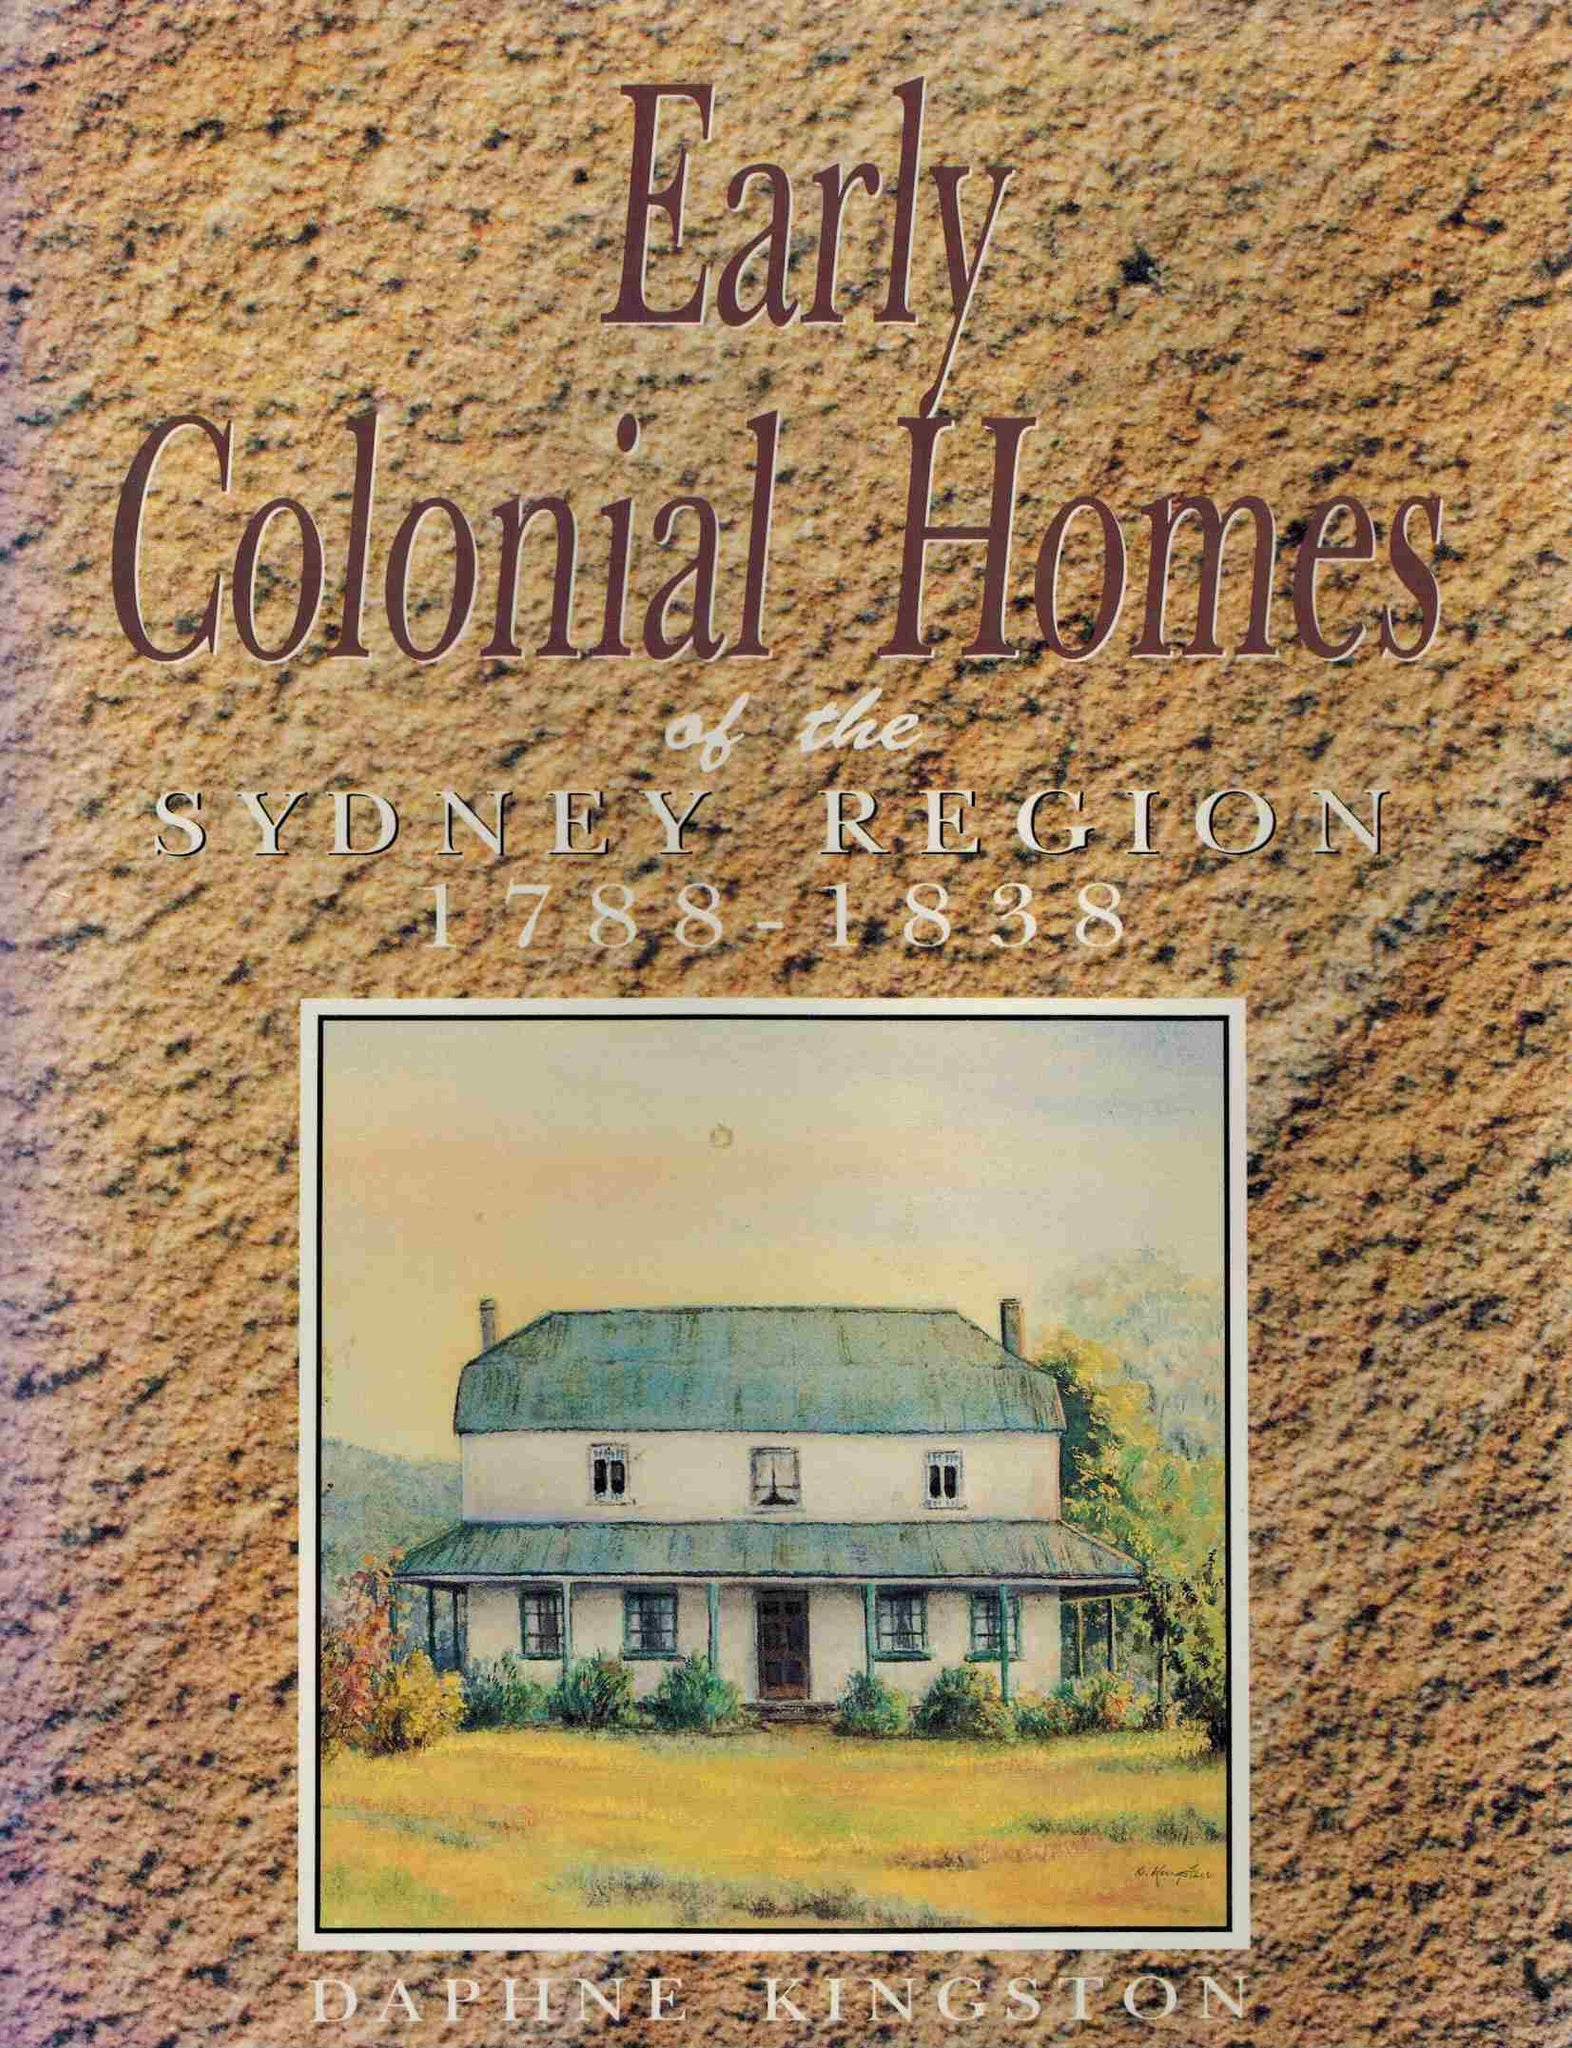 Early Colonial Homes of the Sydney Region 1788 - 1838 - books-new